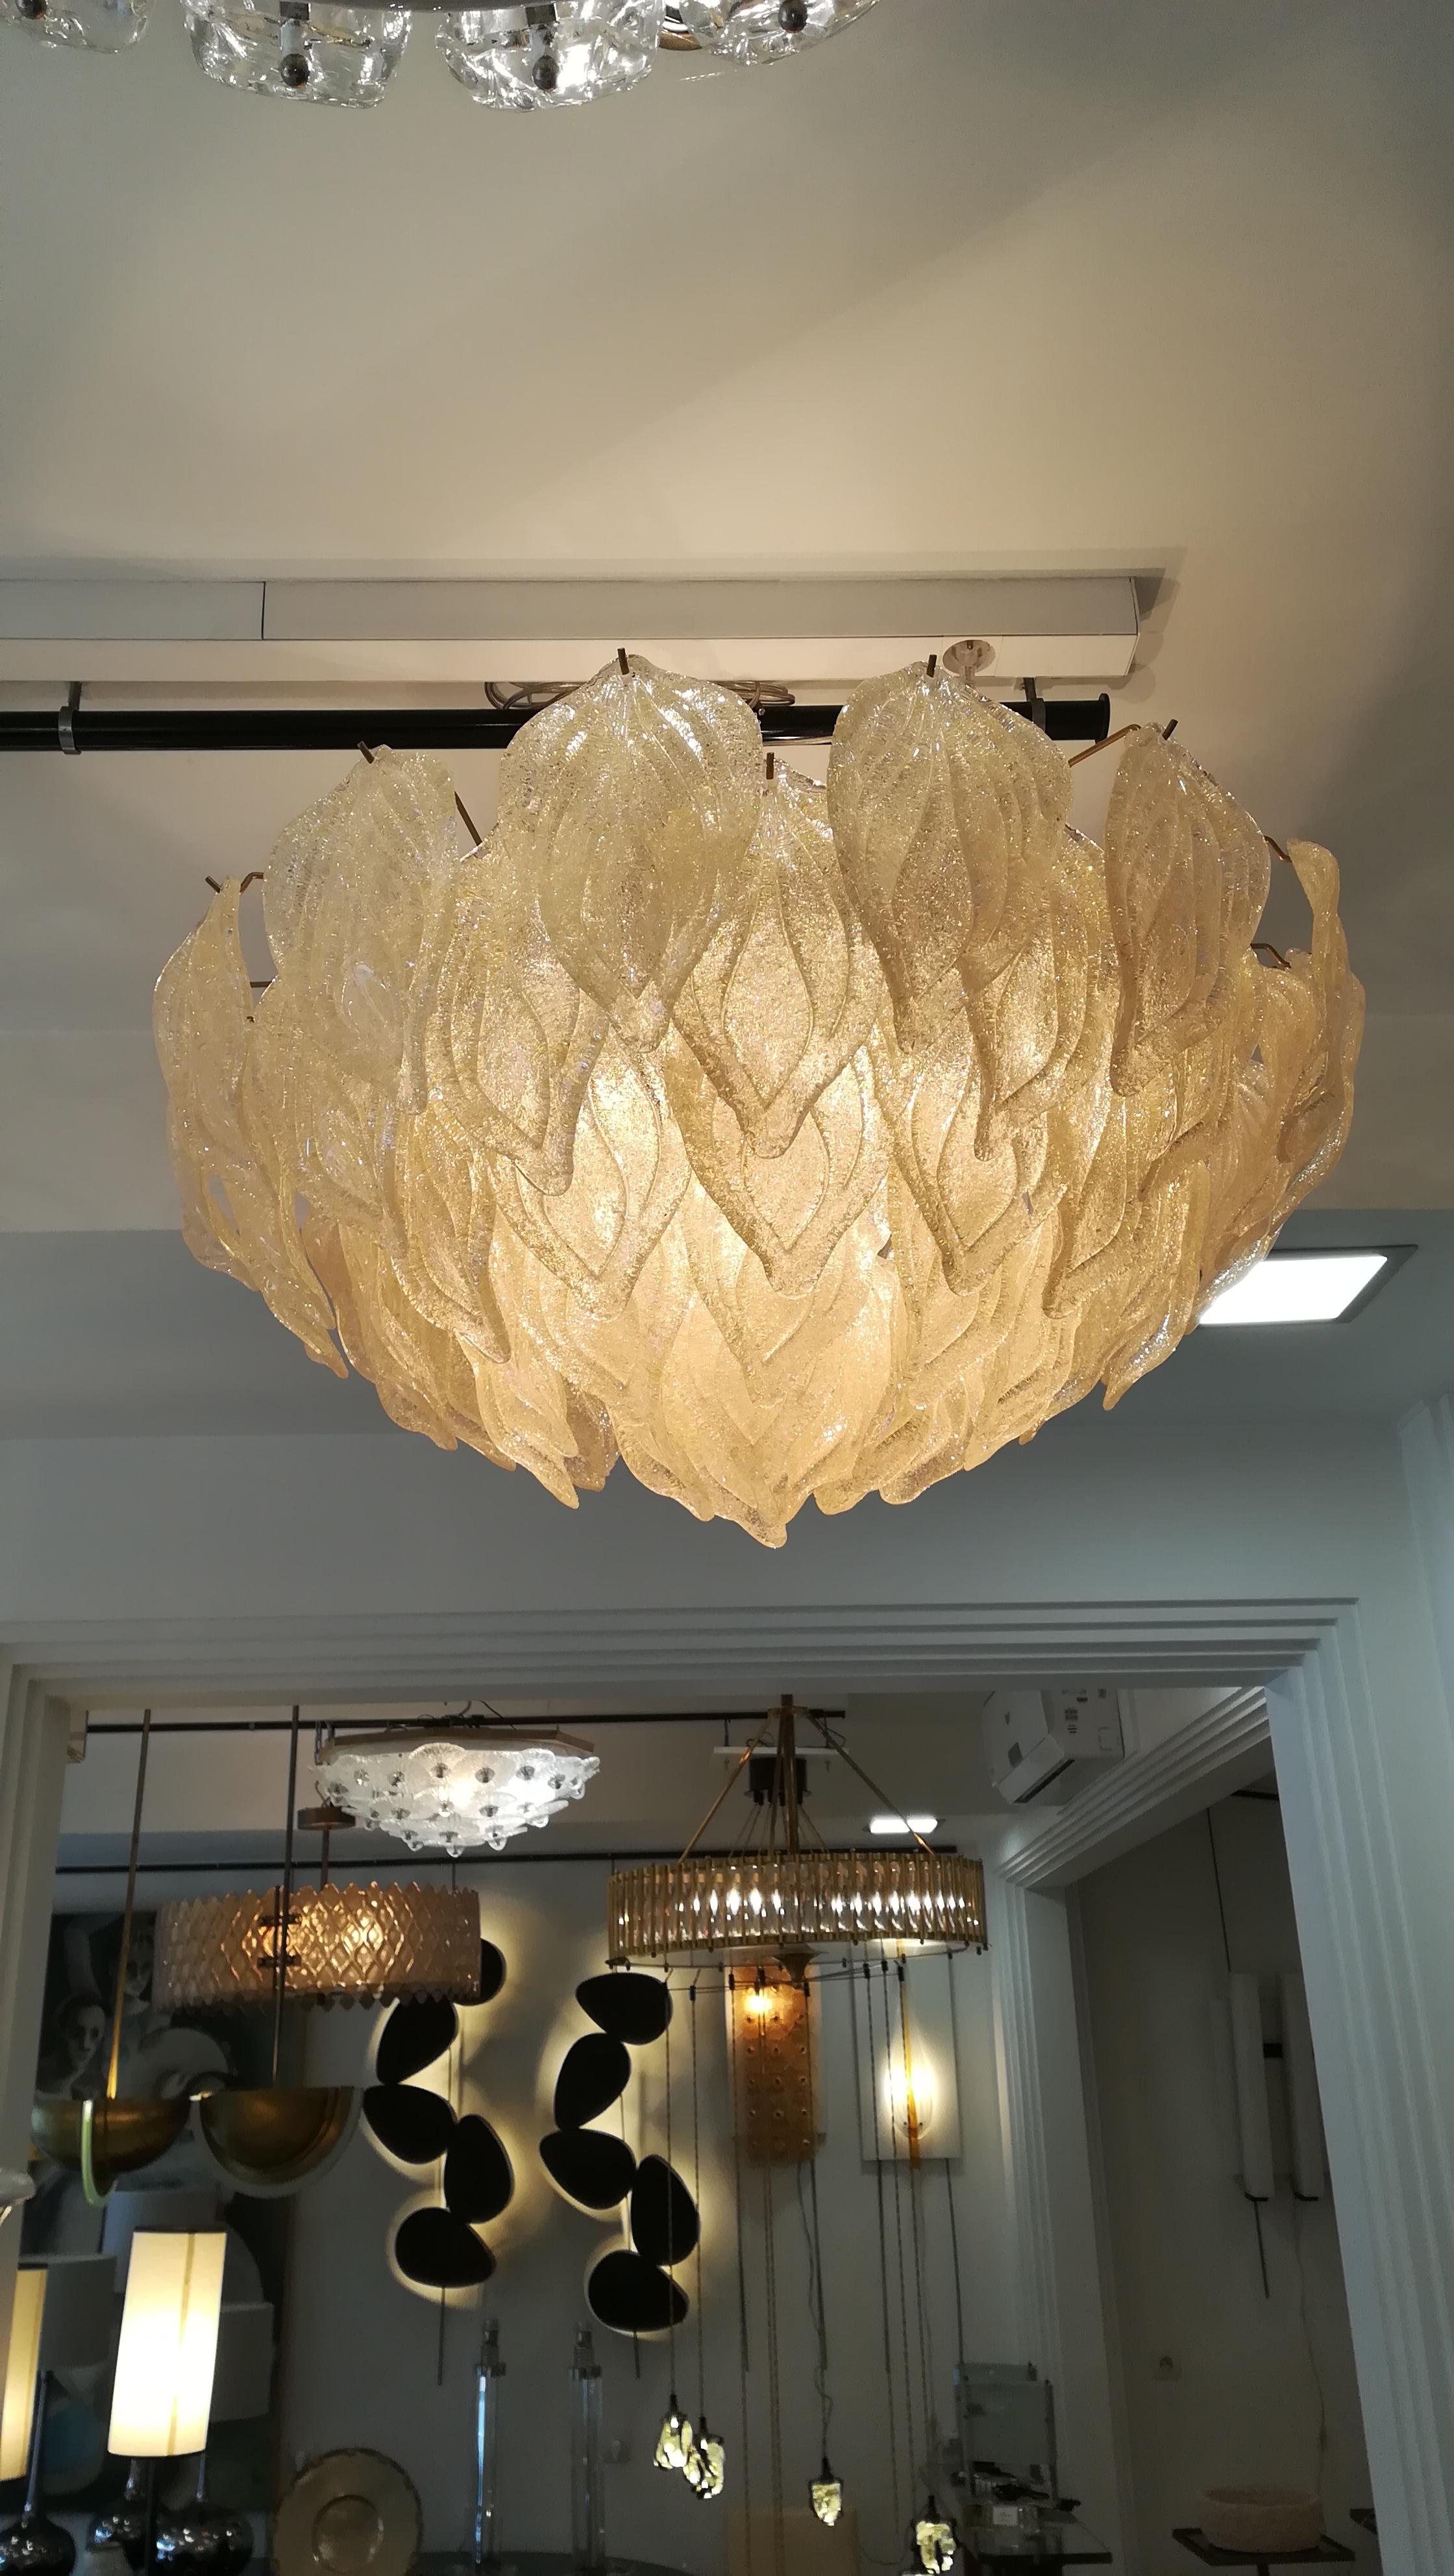 Golden leaves Murano glass pendant (60 leaves), ceiling light / pendant.
Measures: Basket: H 55cm, Dm 85cm.
(adjustable height, can be increased with the chain).